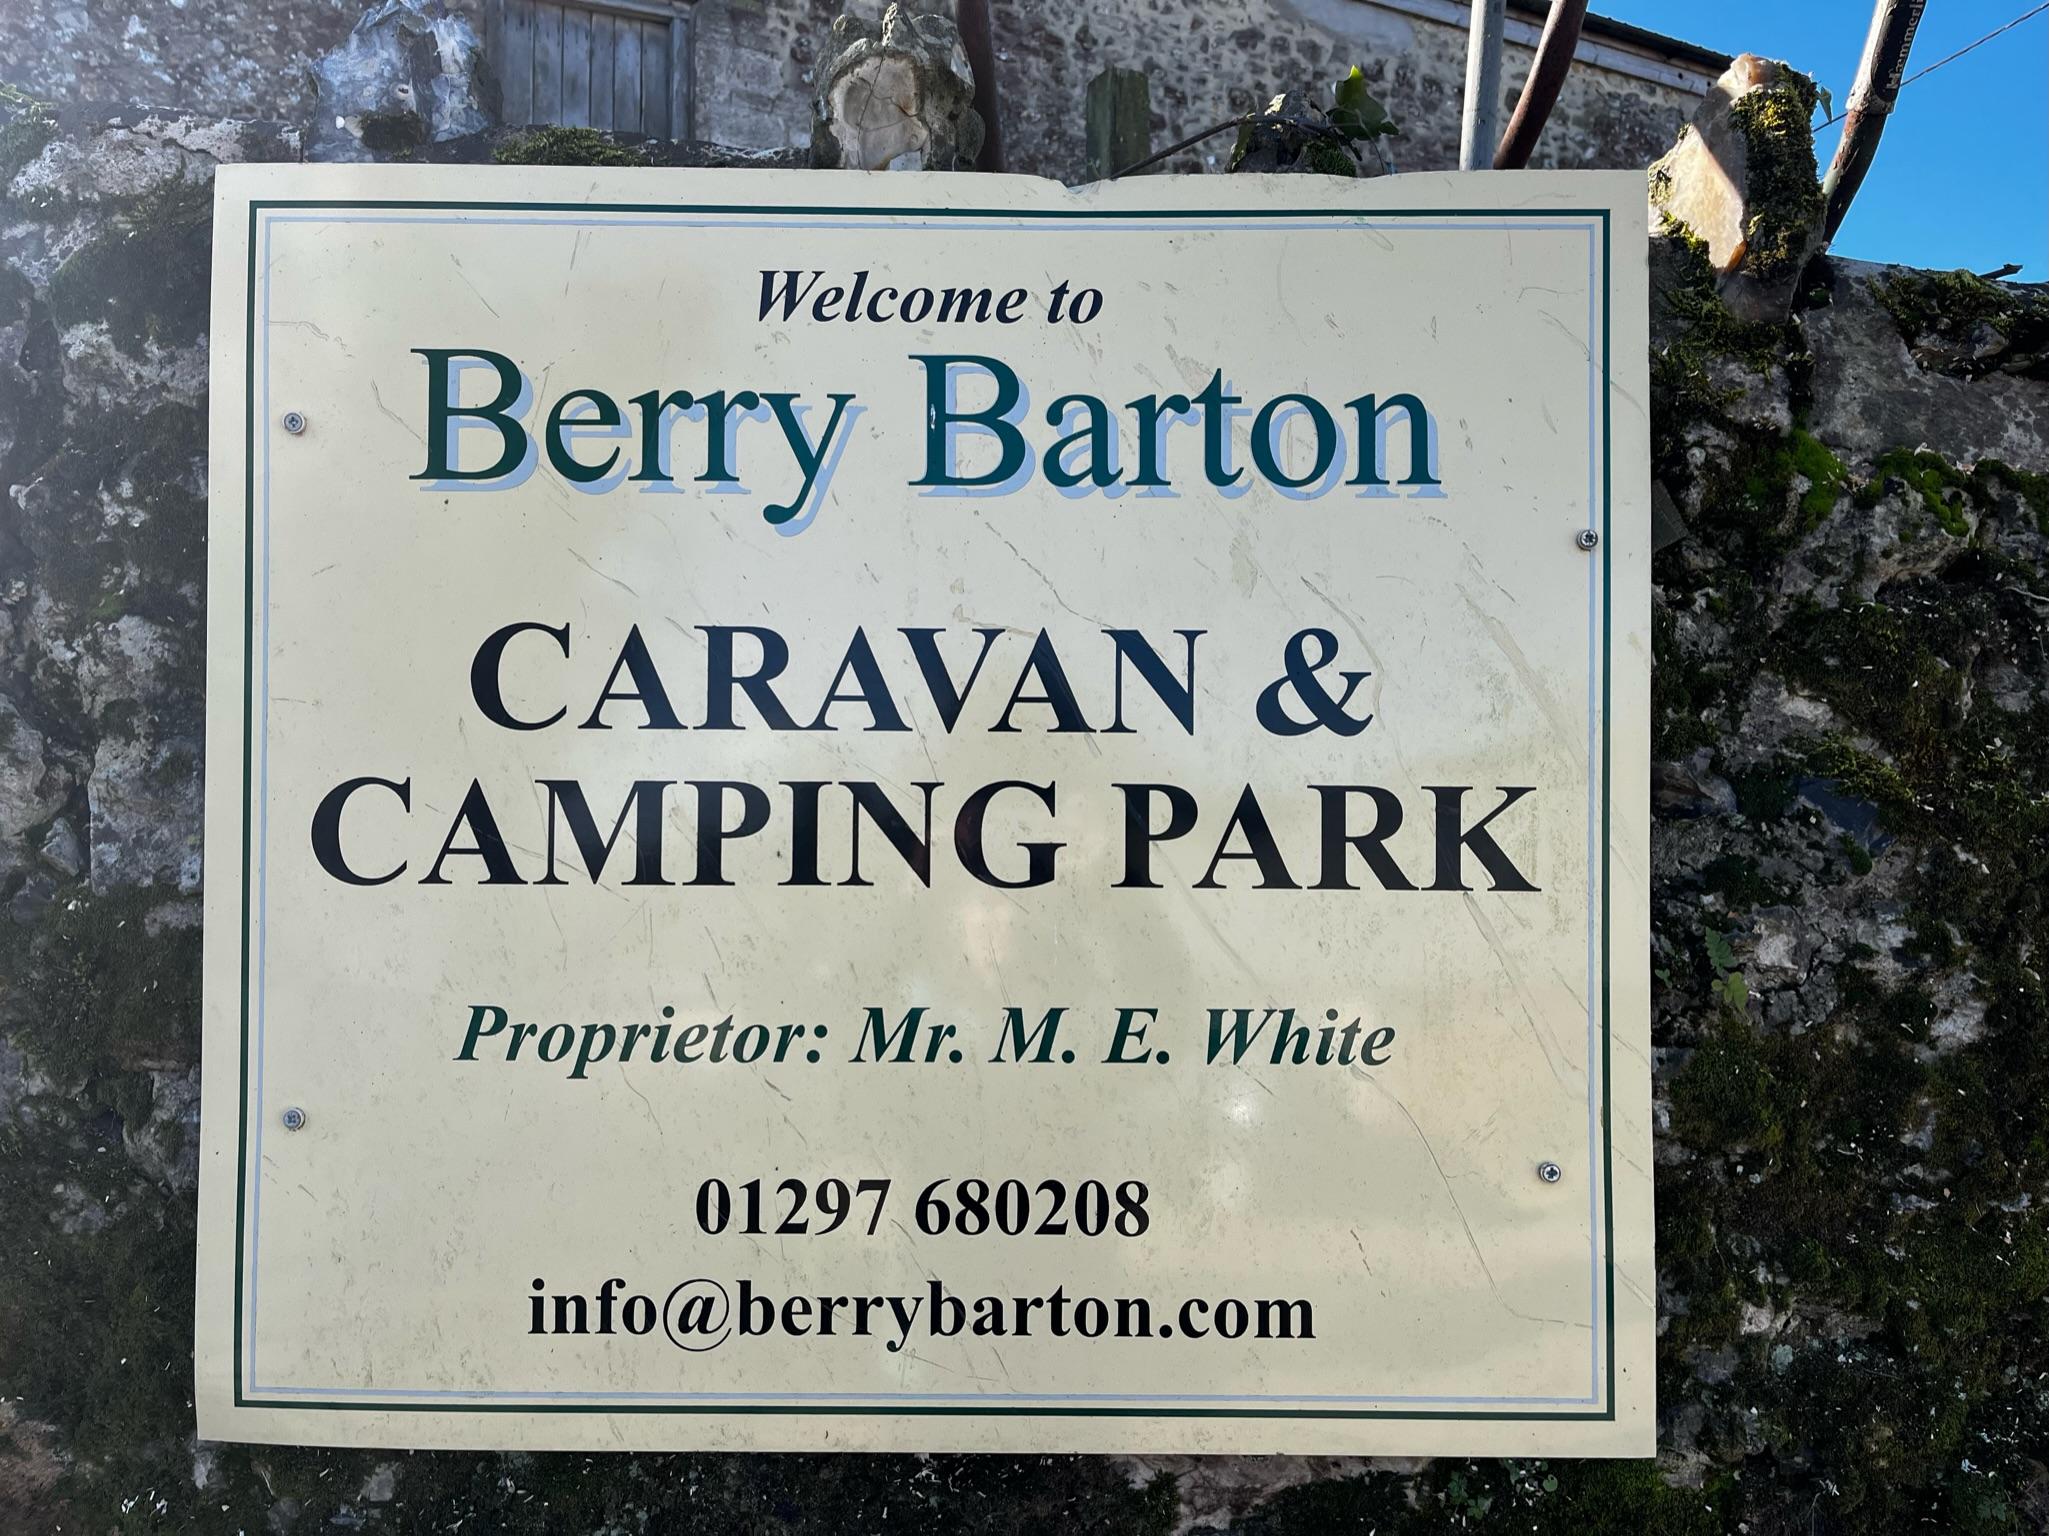 Berry Barton welcome sign